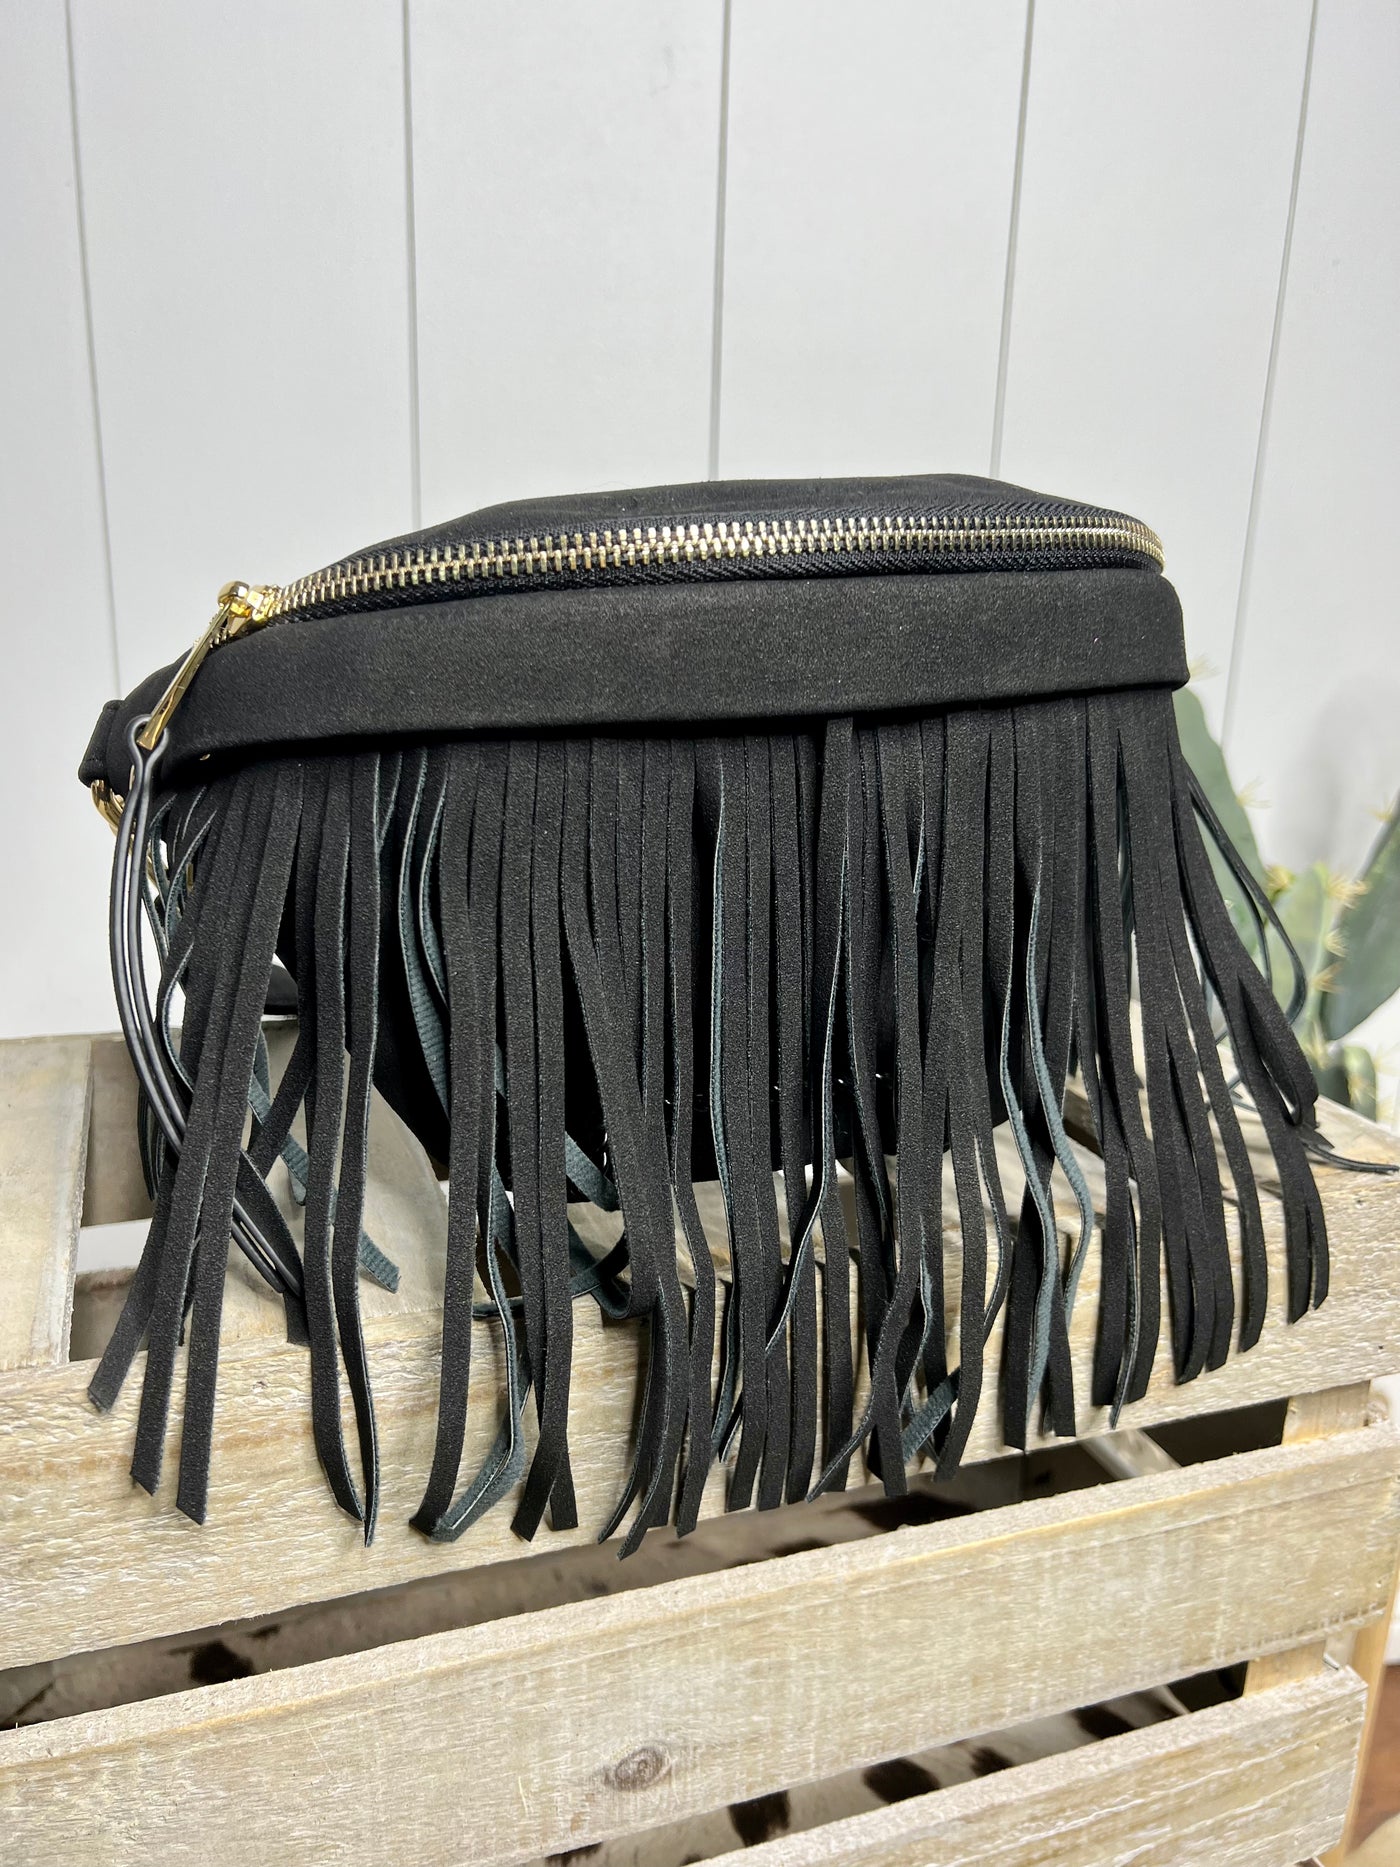 The Brittany Bum Bag